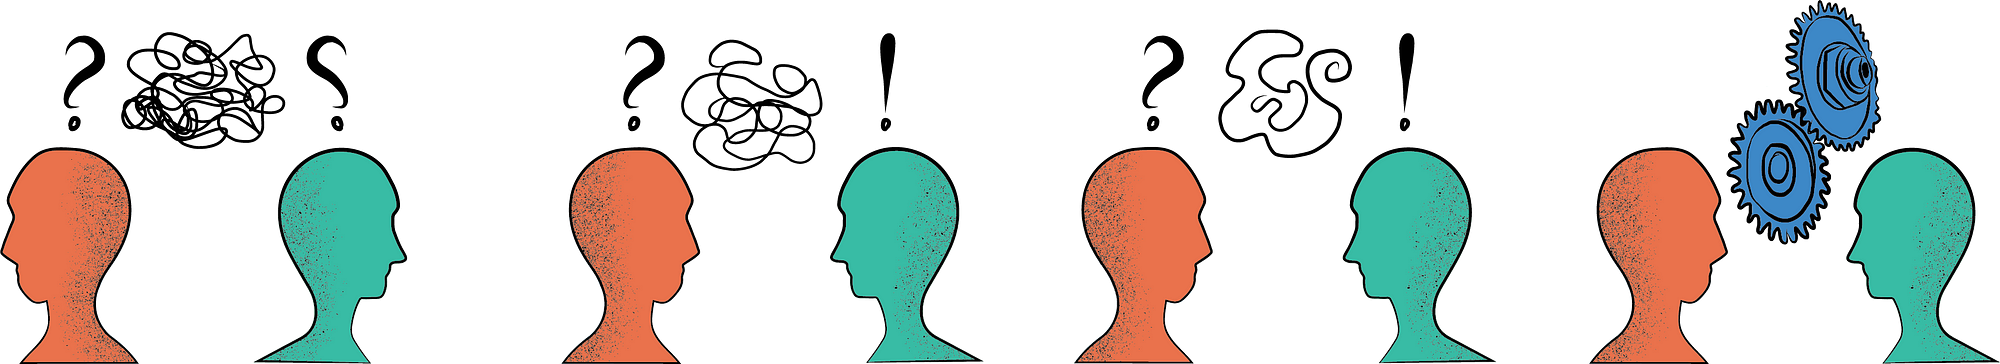 A series of icons of human head in profile. From left to right; 1) two heads face away from each other with a question mark over each head and a dense, messy scribble between them 2) heads face each other with a question mark over the left head and an exclamation mark over the right and a less messy scribble between them 3) heads face each other with a smooth scribble between them and the positions of the question mark and exclamation mark reversed 4) Two gears moving between heads.